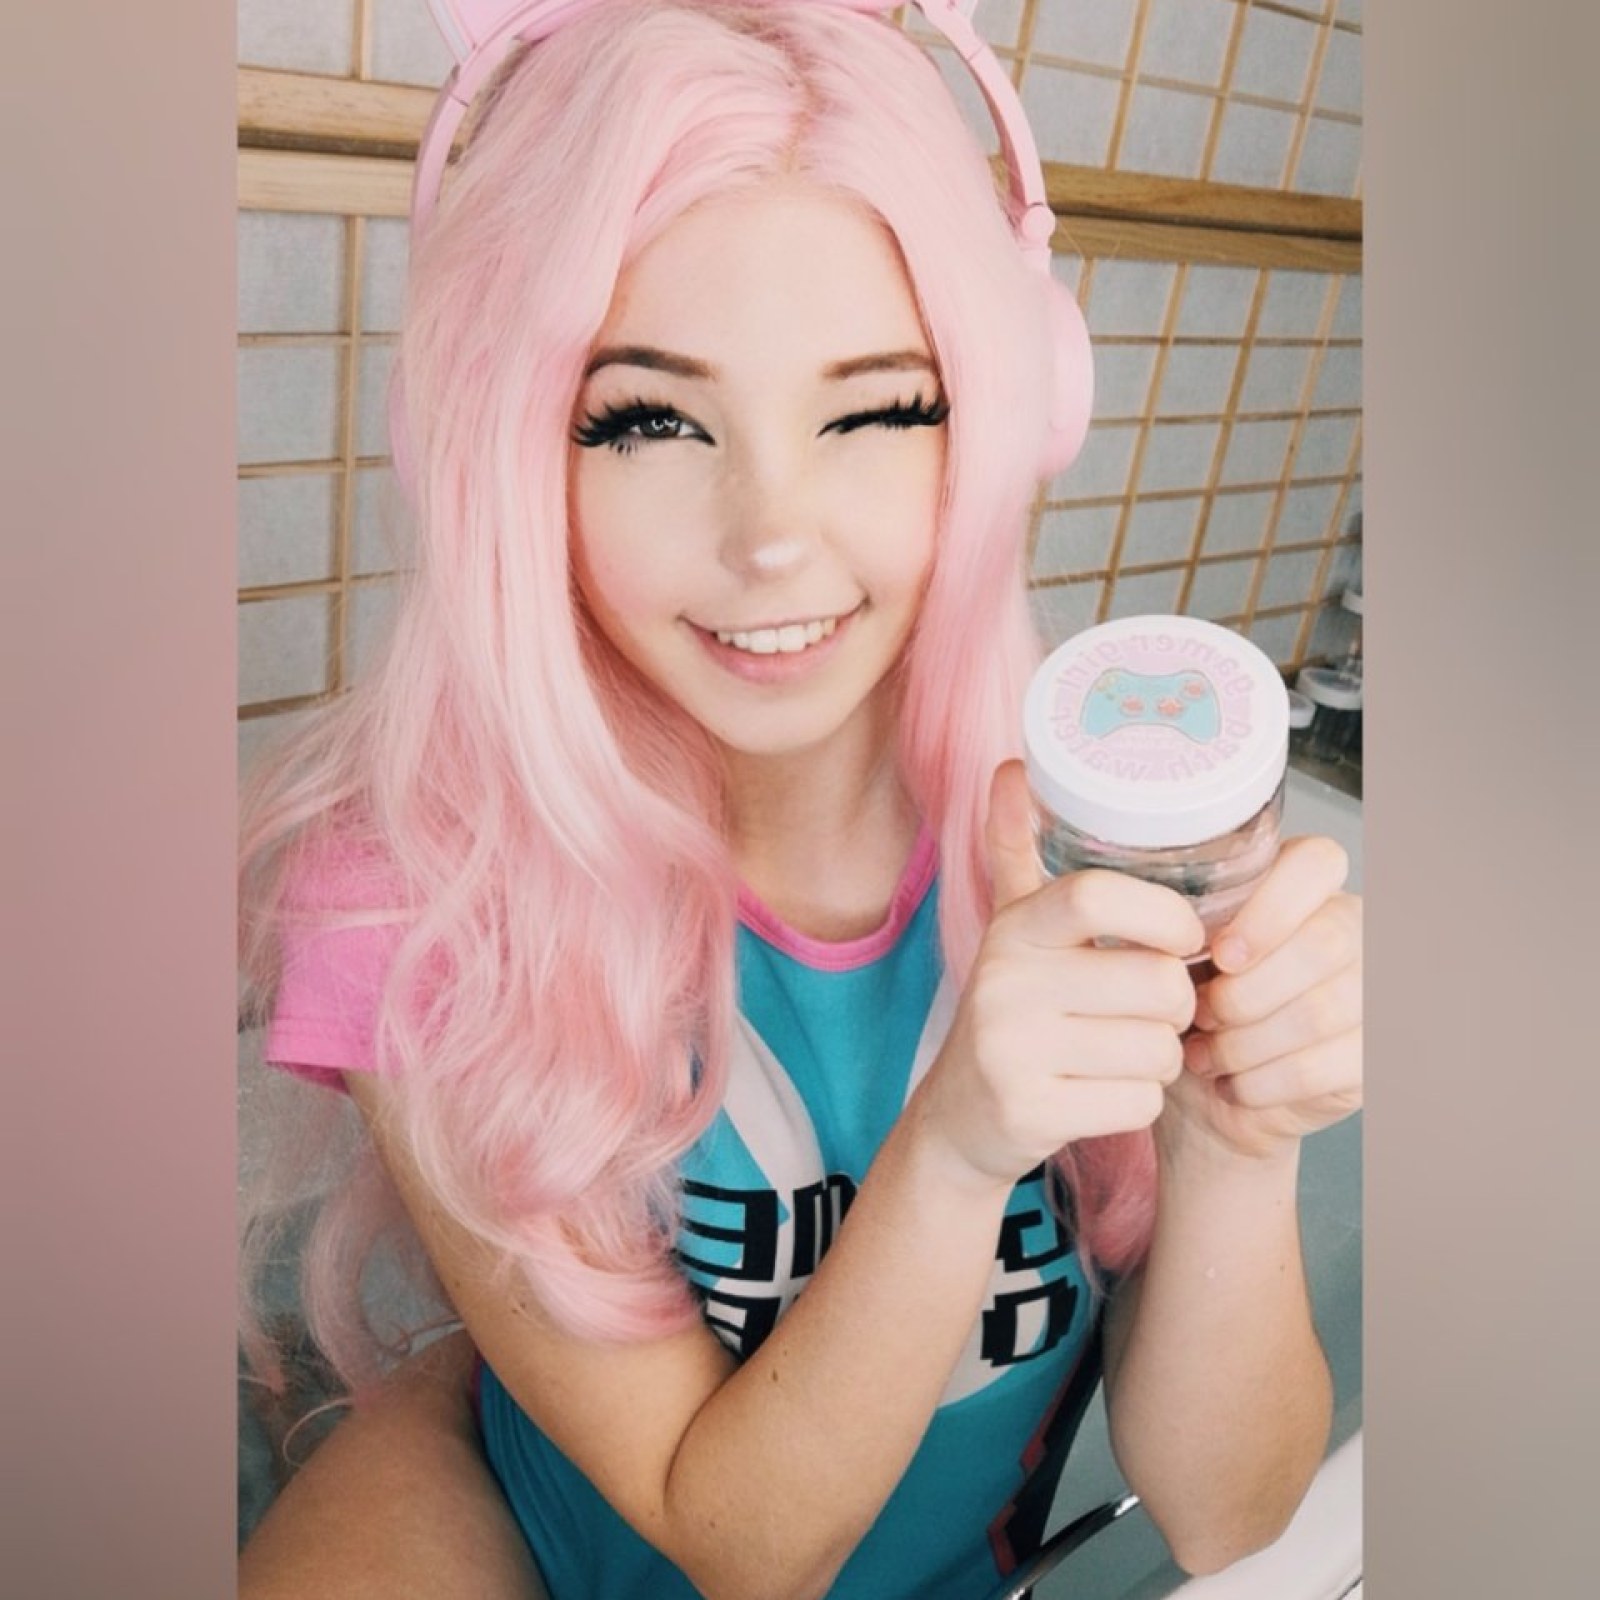 Much make belle how does delphine Belle Delphine: